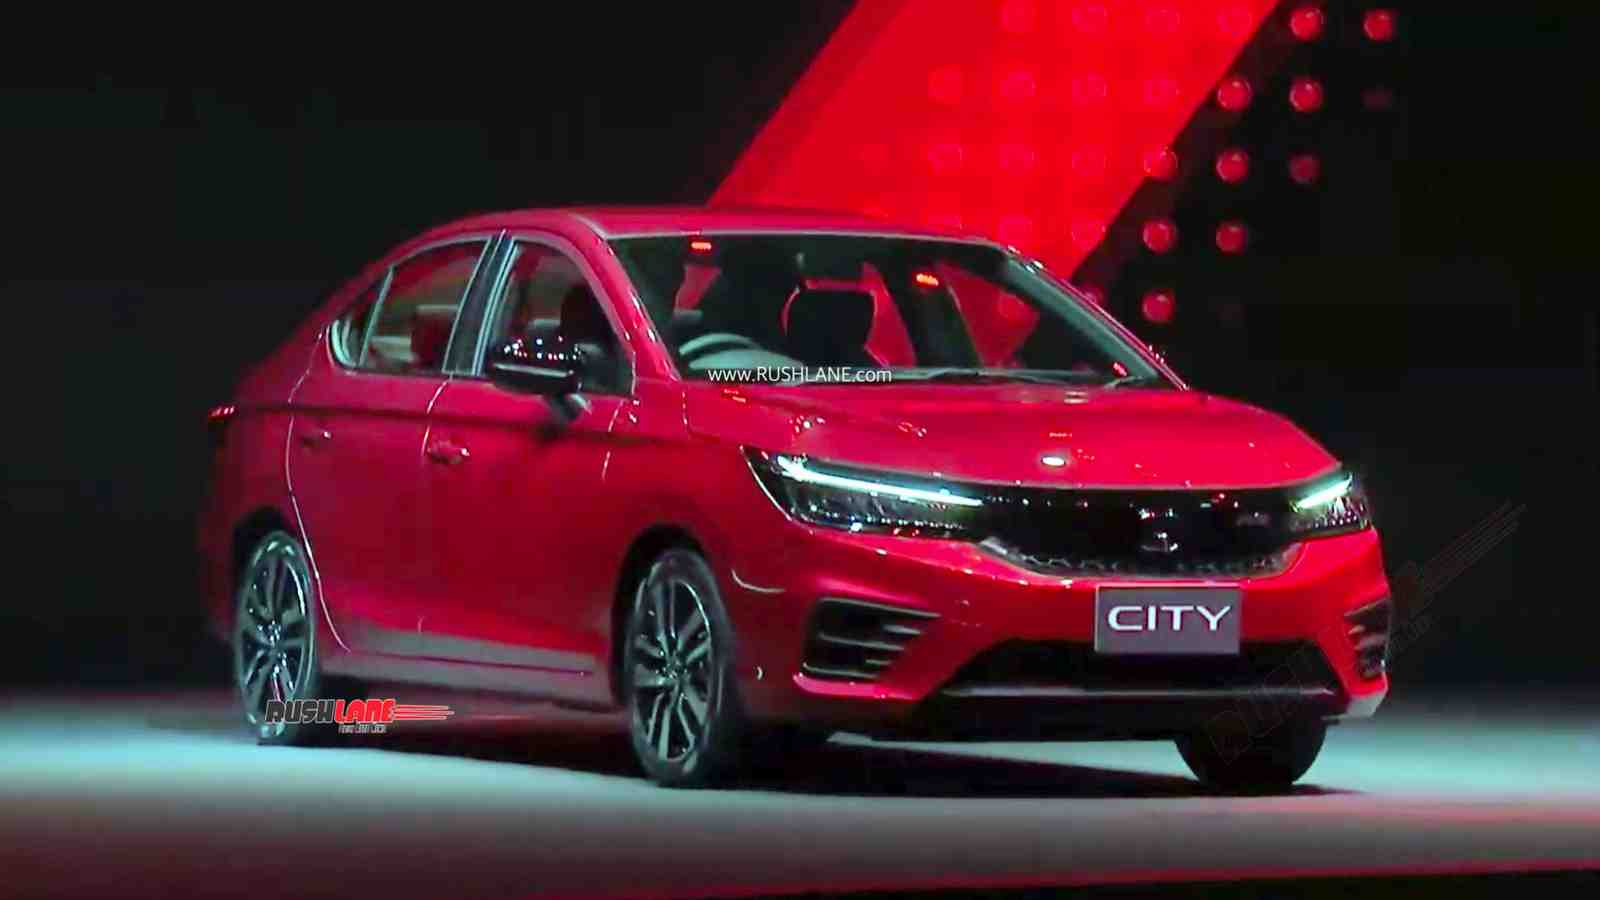 2020 Honda City Rs Turbo 1 Liter Launched Price Variants Specs